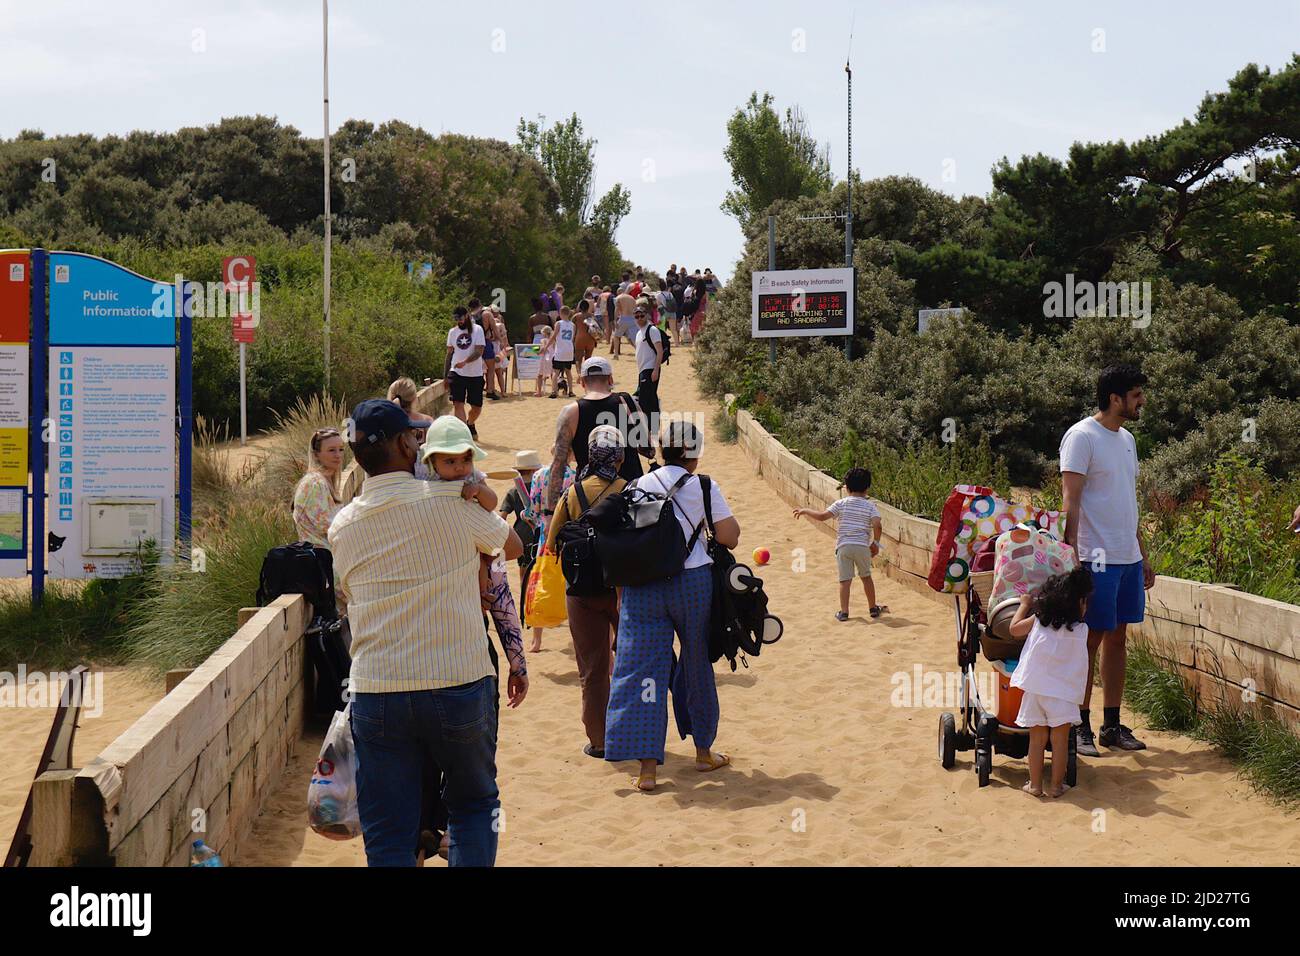 Camber, East Sussex, UK. 17 Jun, 2022. UK Weather: Hordes of visitors climb the sand dunes heading towards the beach at Camber on the East Sussex coast on one of the hottest days of the year so far. Photo Credit: Paul Lawrenson/Alamy Live News Stock Photo